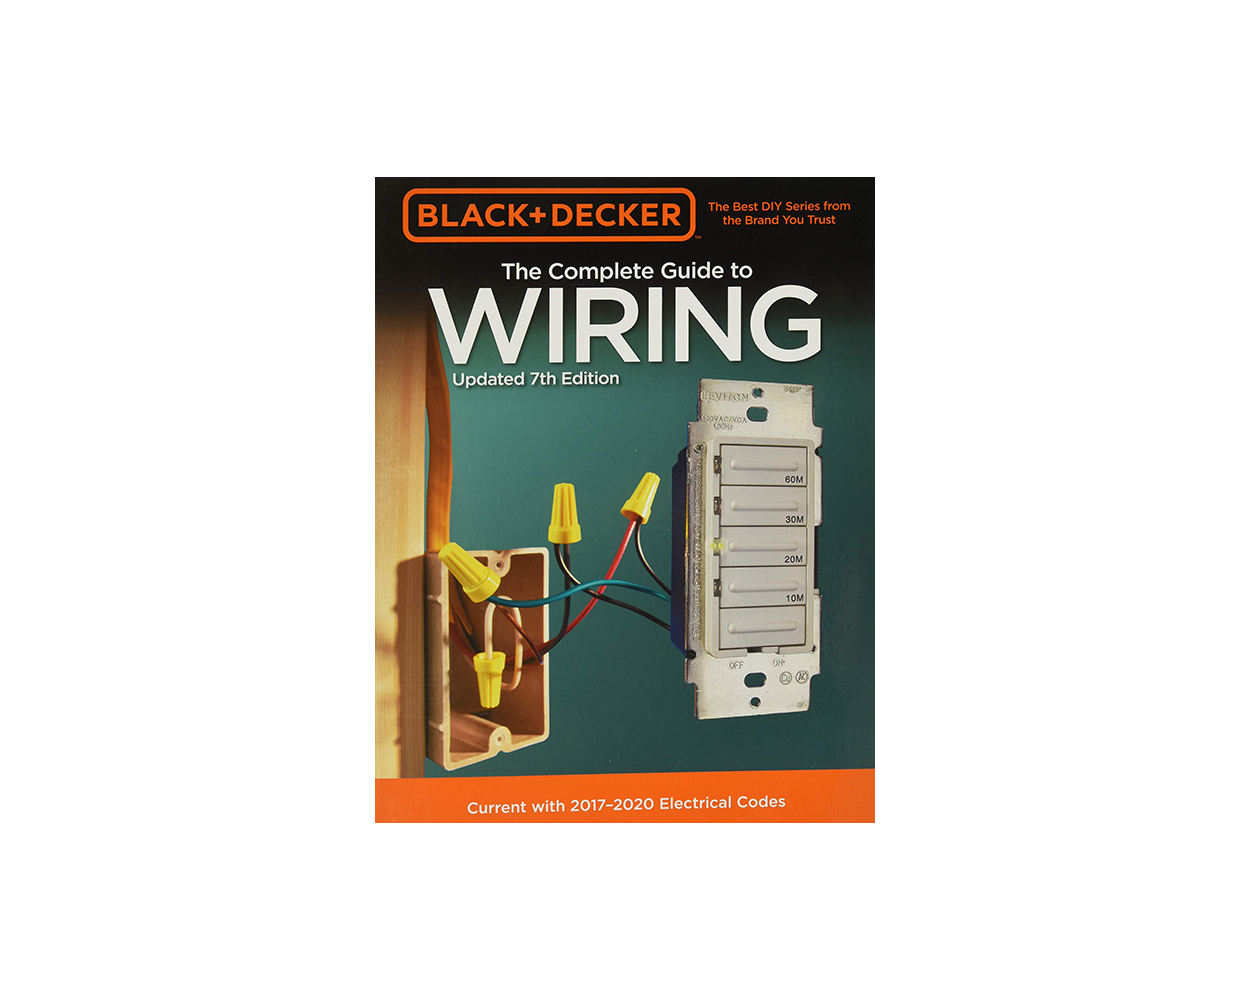 Black & Decker The Complete Guide to Wiring, Updated 7th Edition: Current  with 2017-2020 Electrical Codes (Volume 7) (Black & Decker Complete Guide